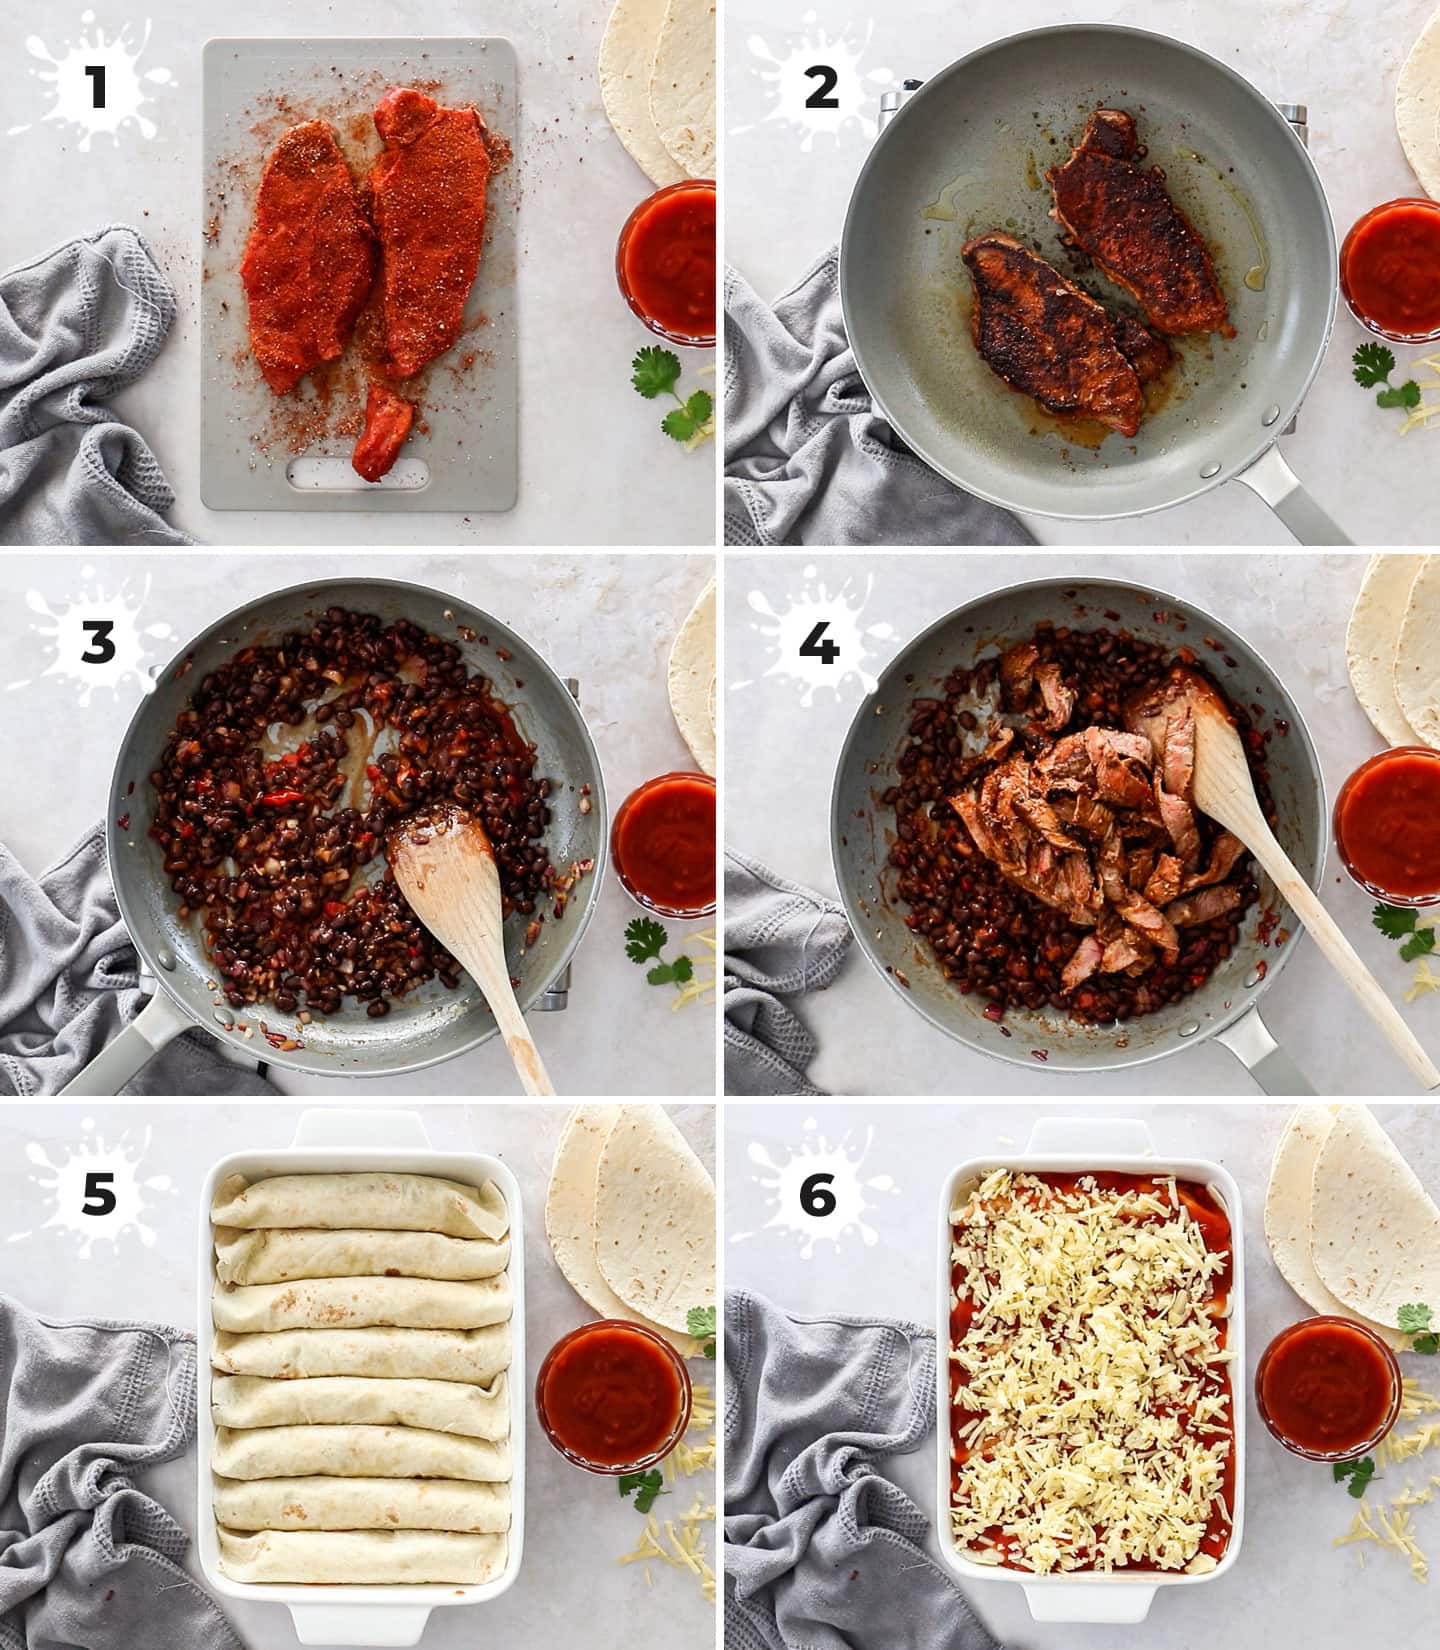 A collage of 6 images showing how to make steak enchiladas.